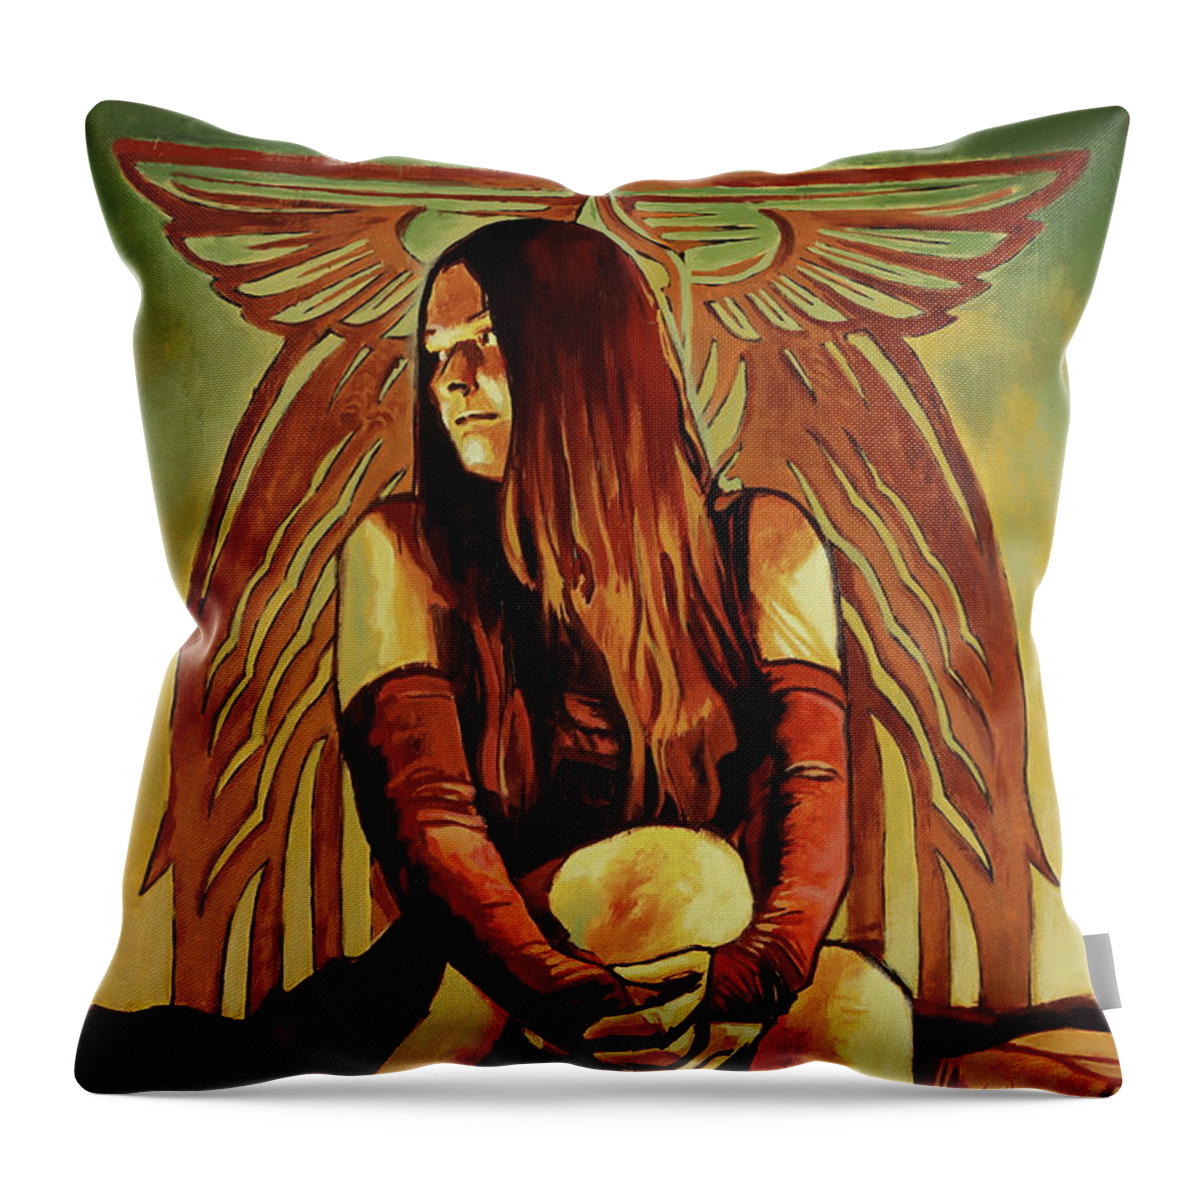 Girl Throw Pillow featuring the painting Empress Magicka by Sv Bell